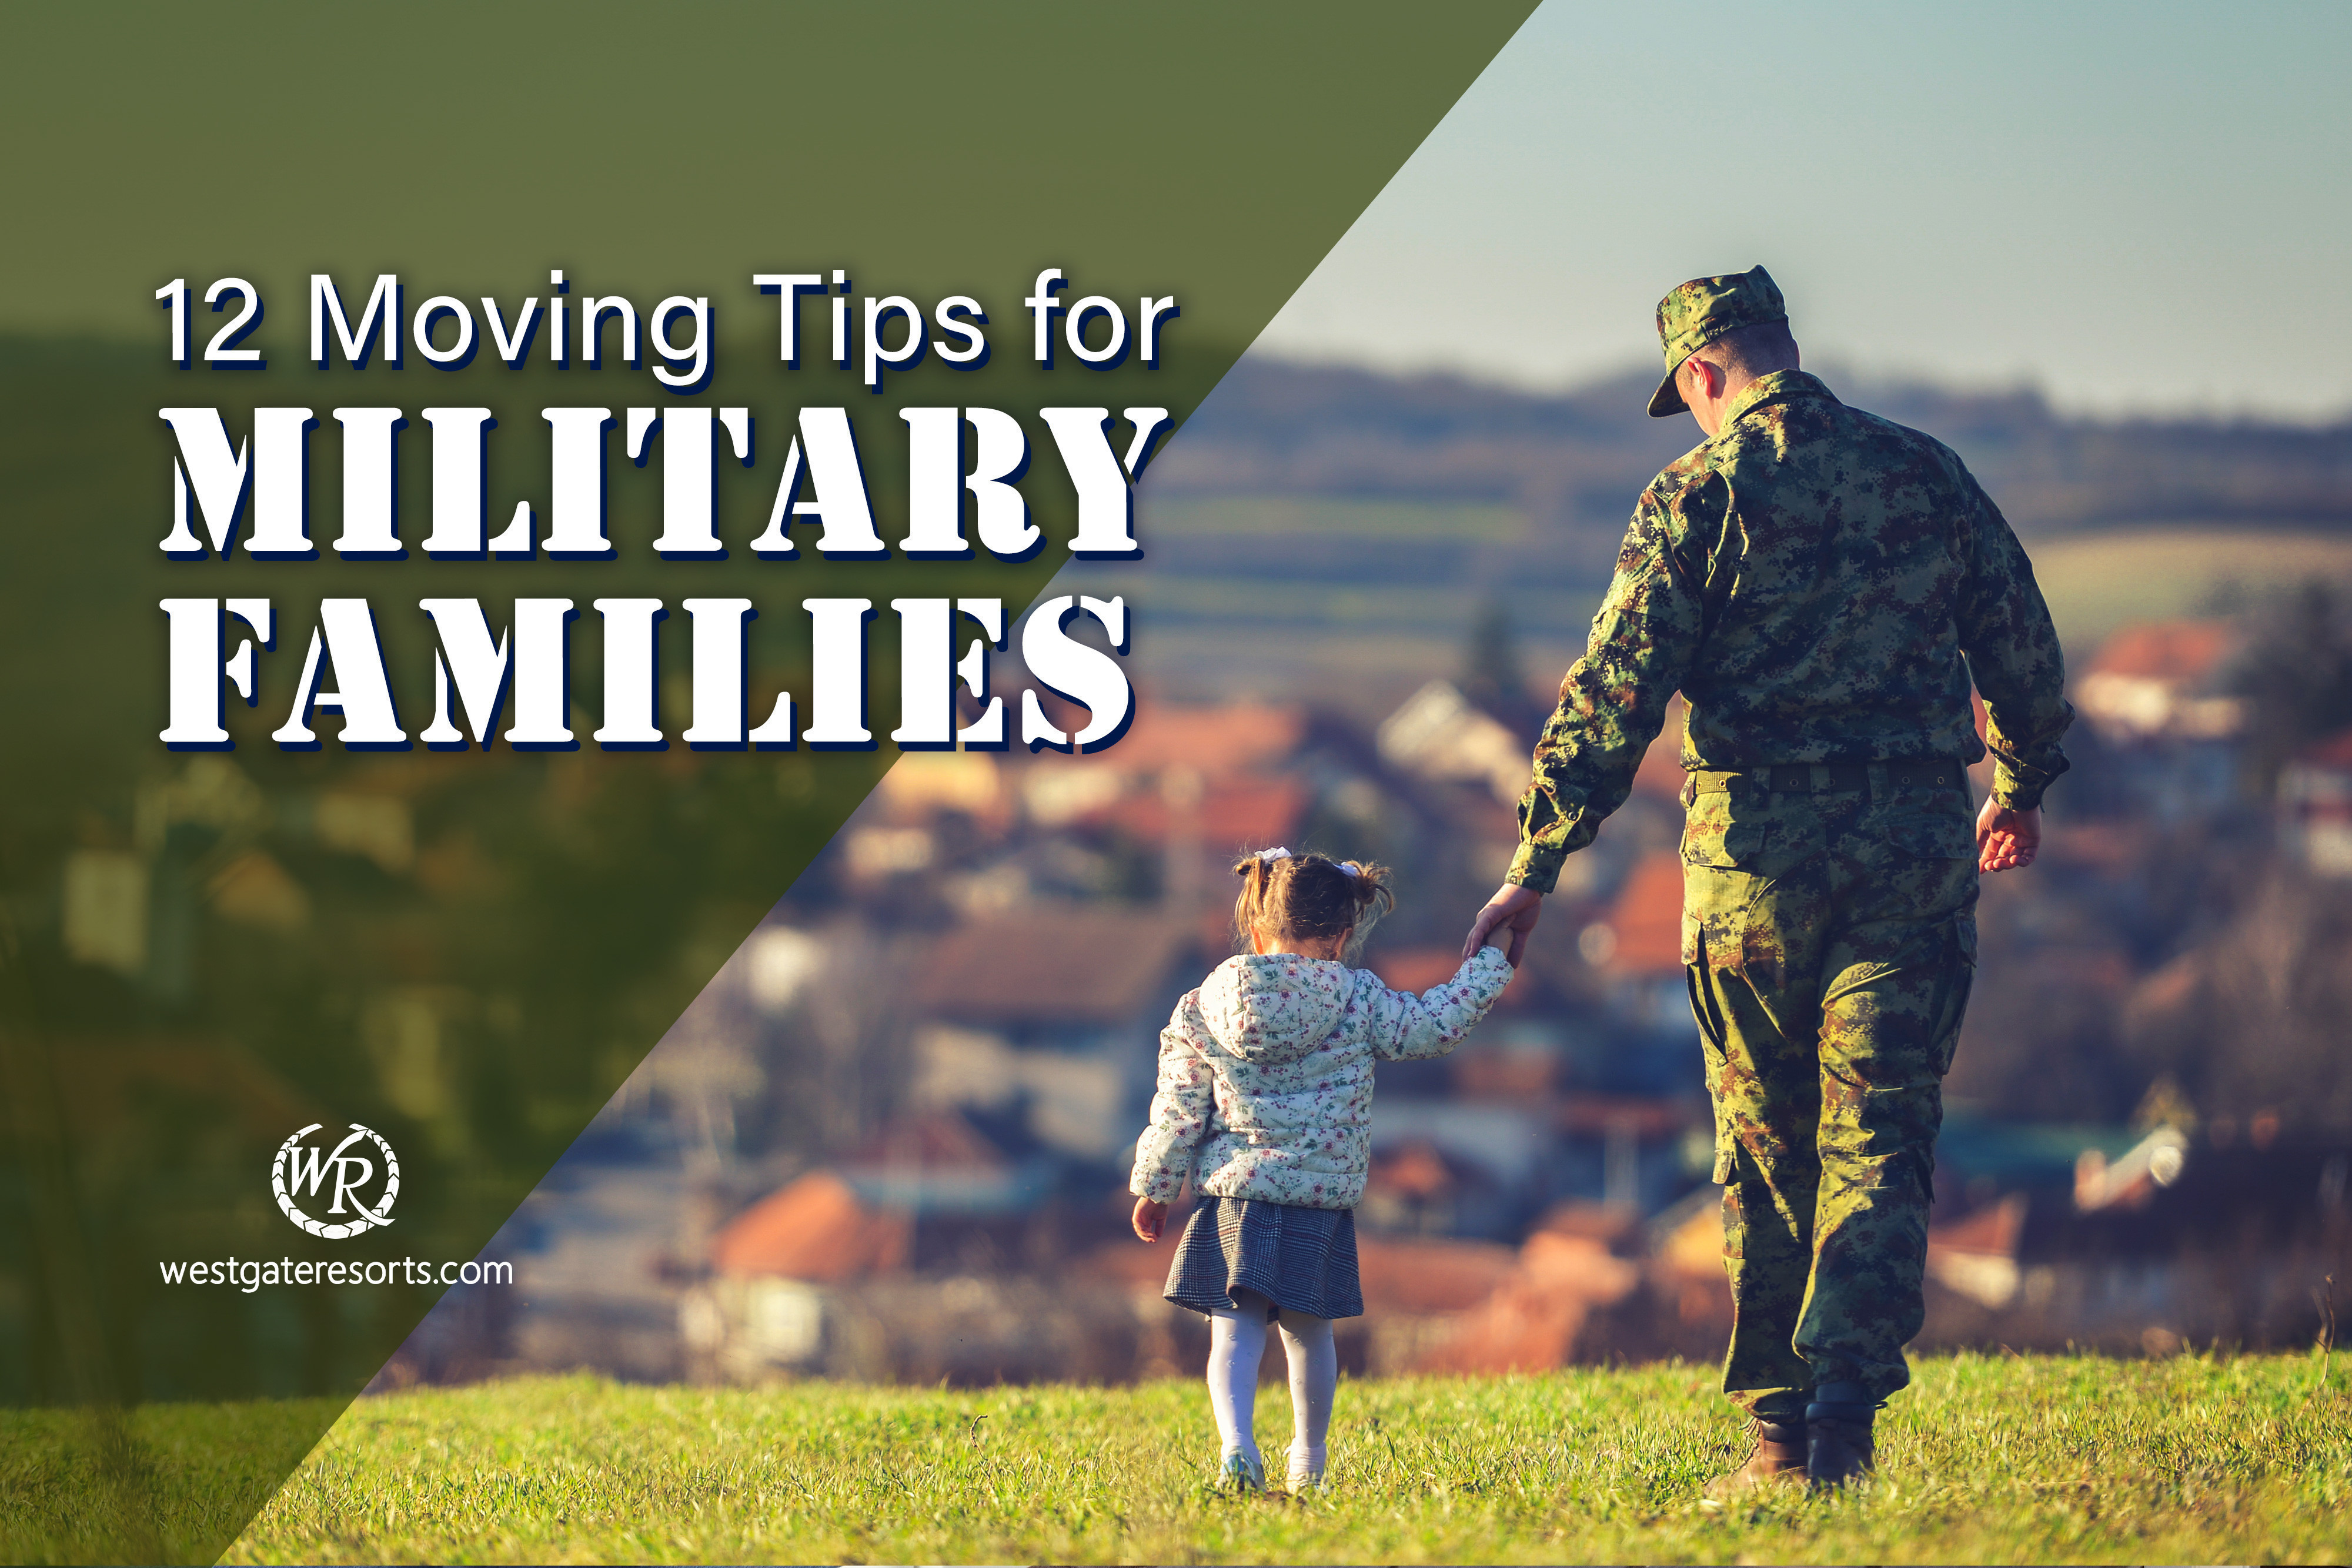 12 Moving Tips for Military Families